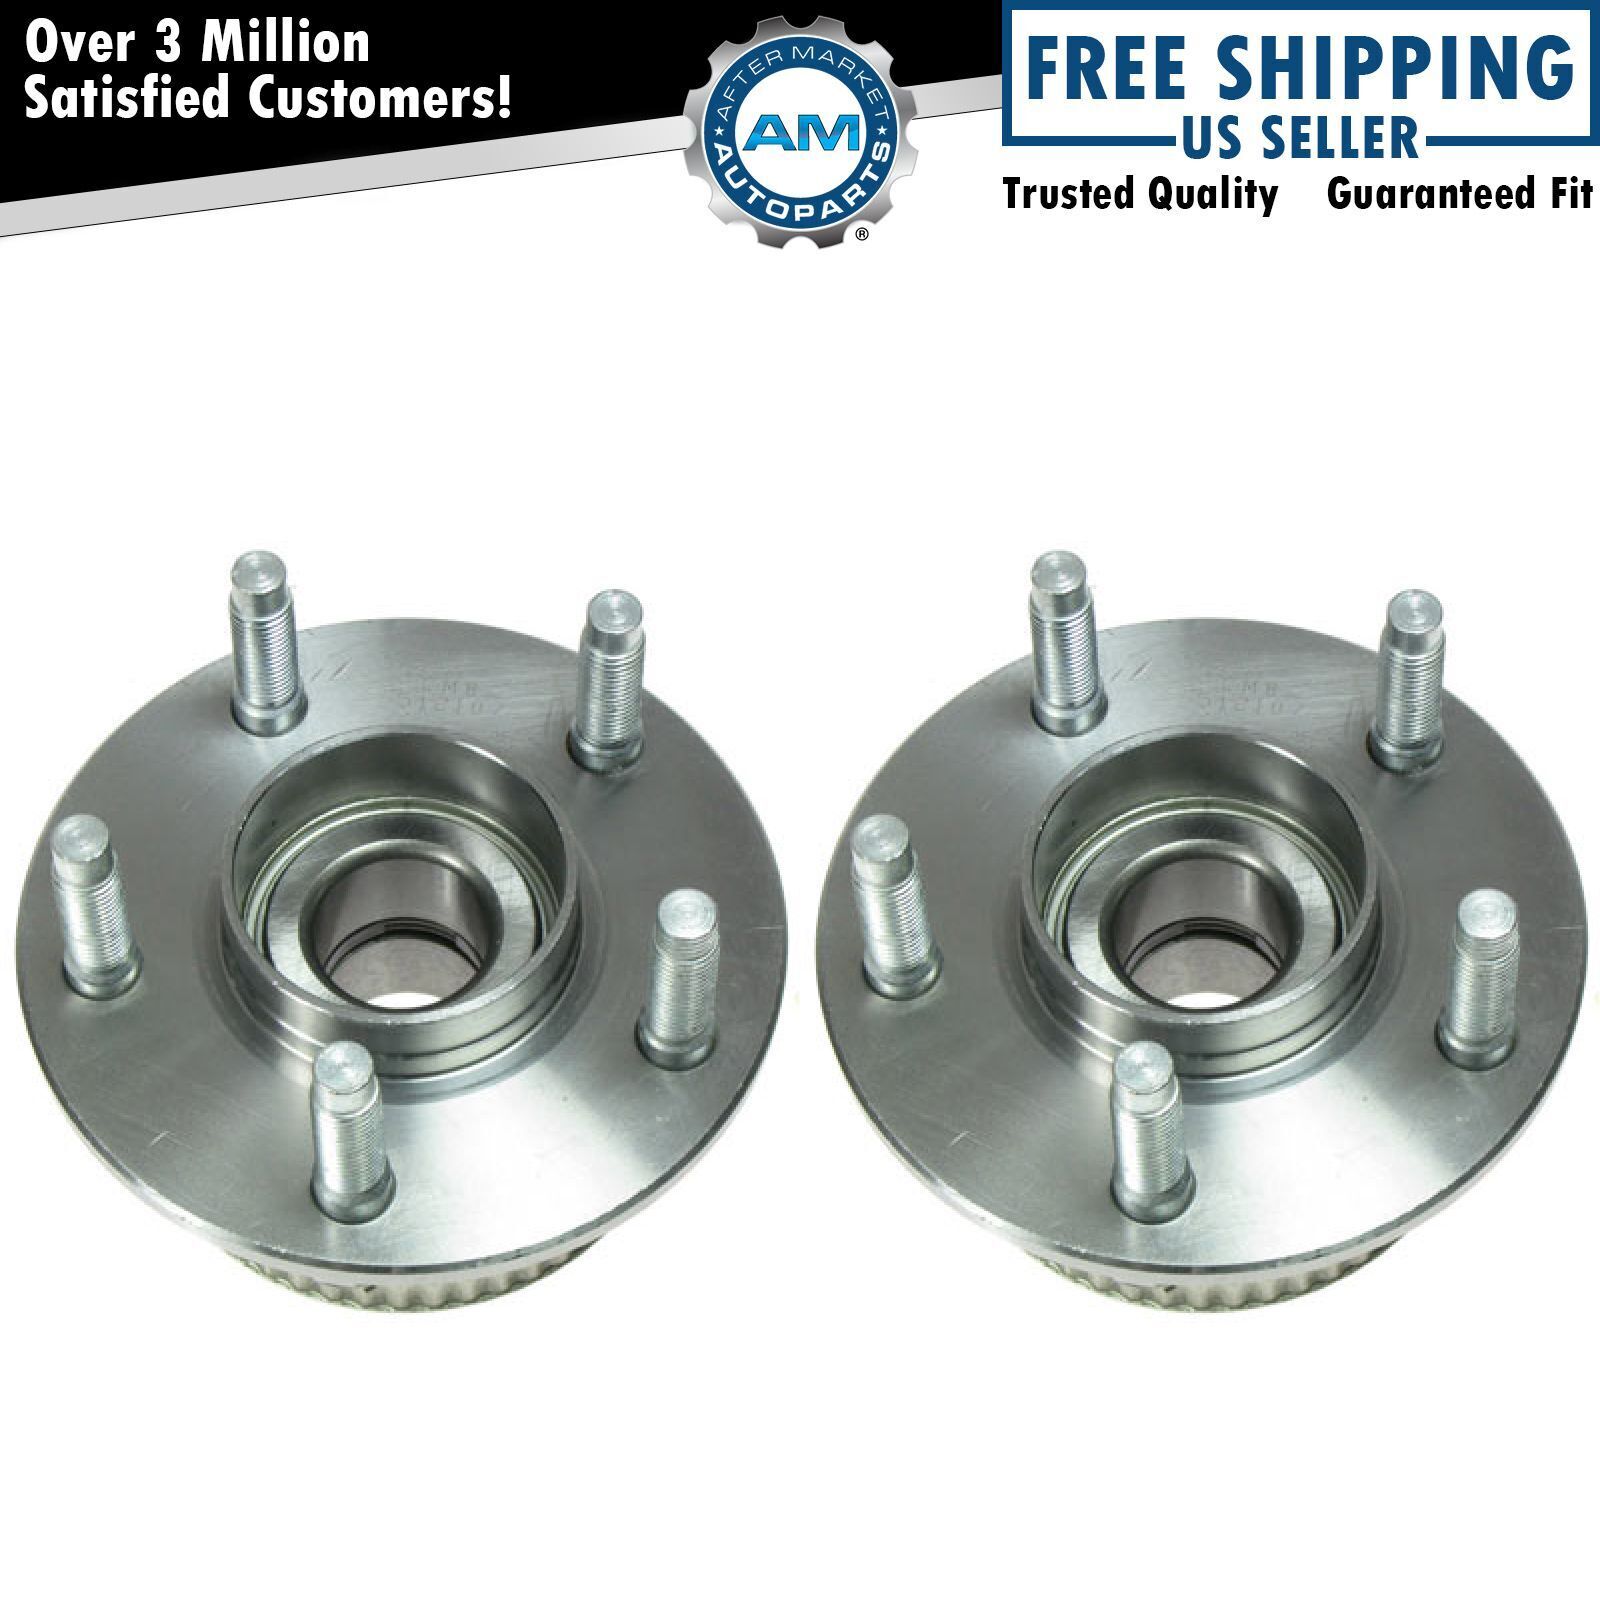 Rear Wheel Hub & Bearing Assembly Pair Set for Taurus Sable Continental w/ ABS